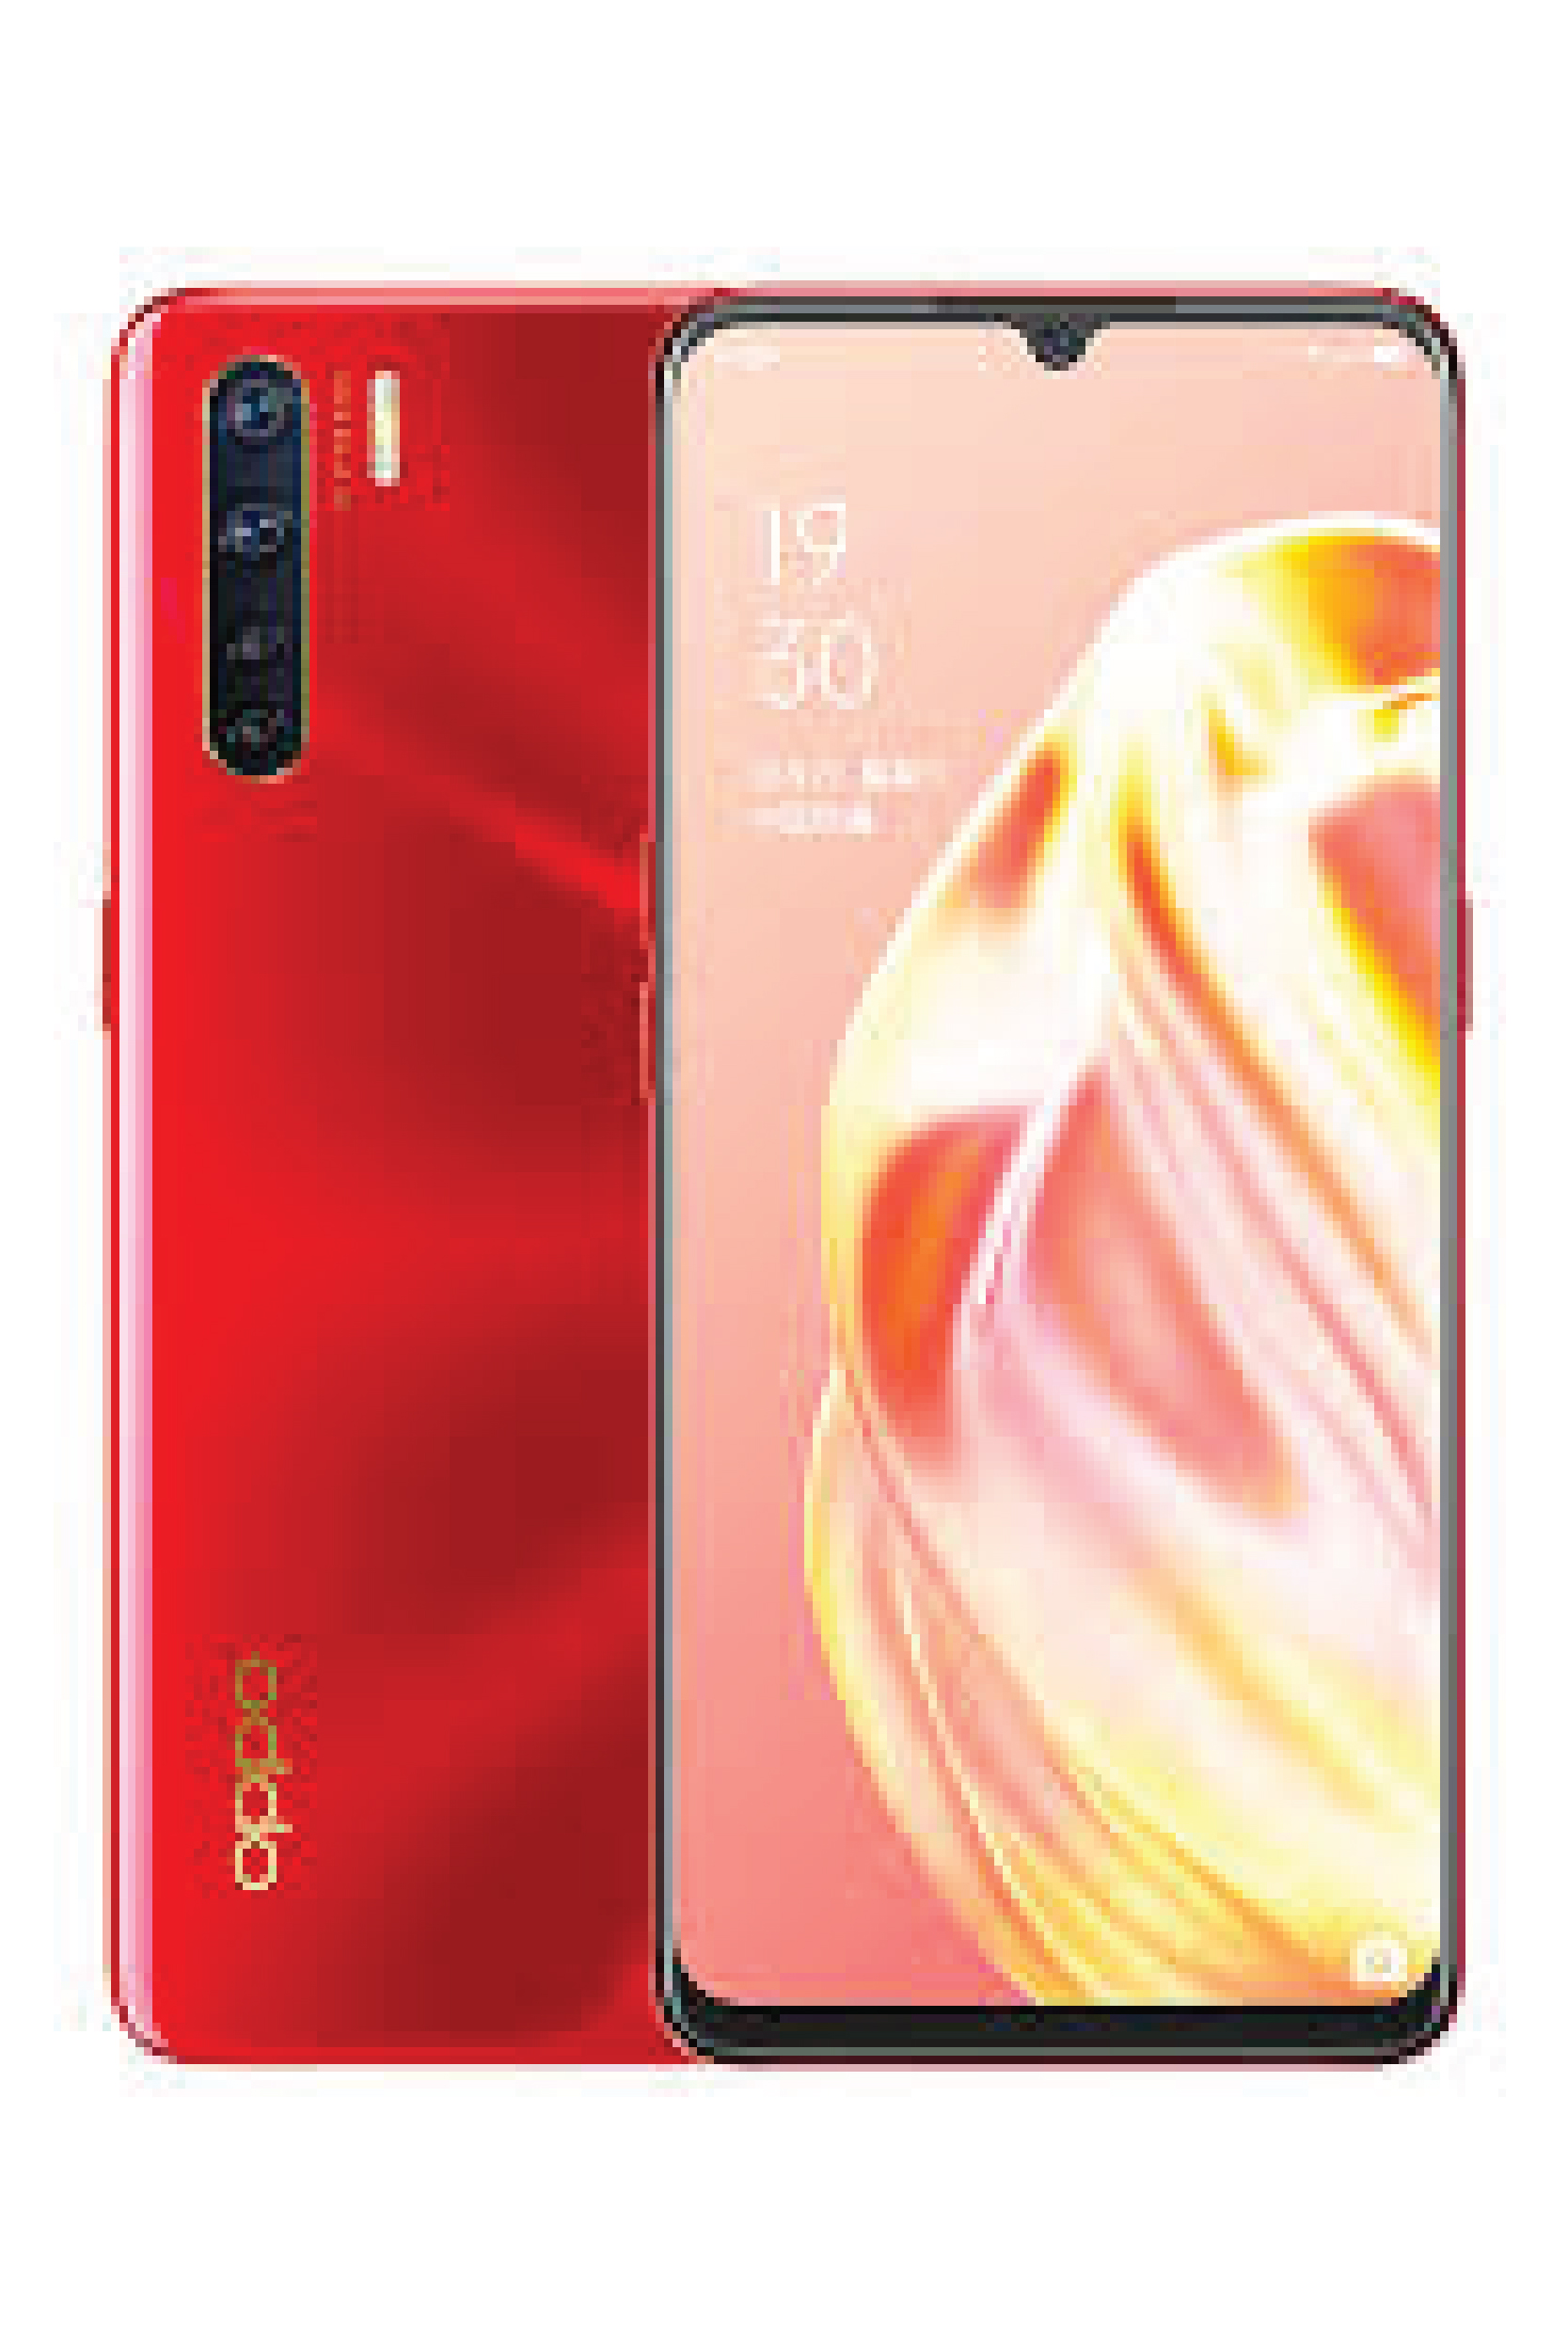 Oppo New Model 2020 - Coloros 2020 Giveaway Win An Oppo Reno 10x Zoom